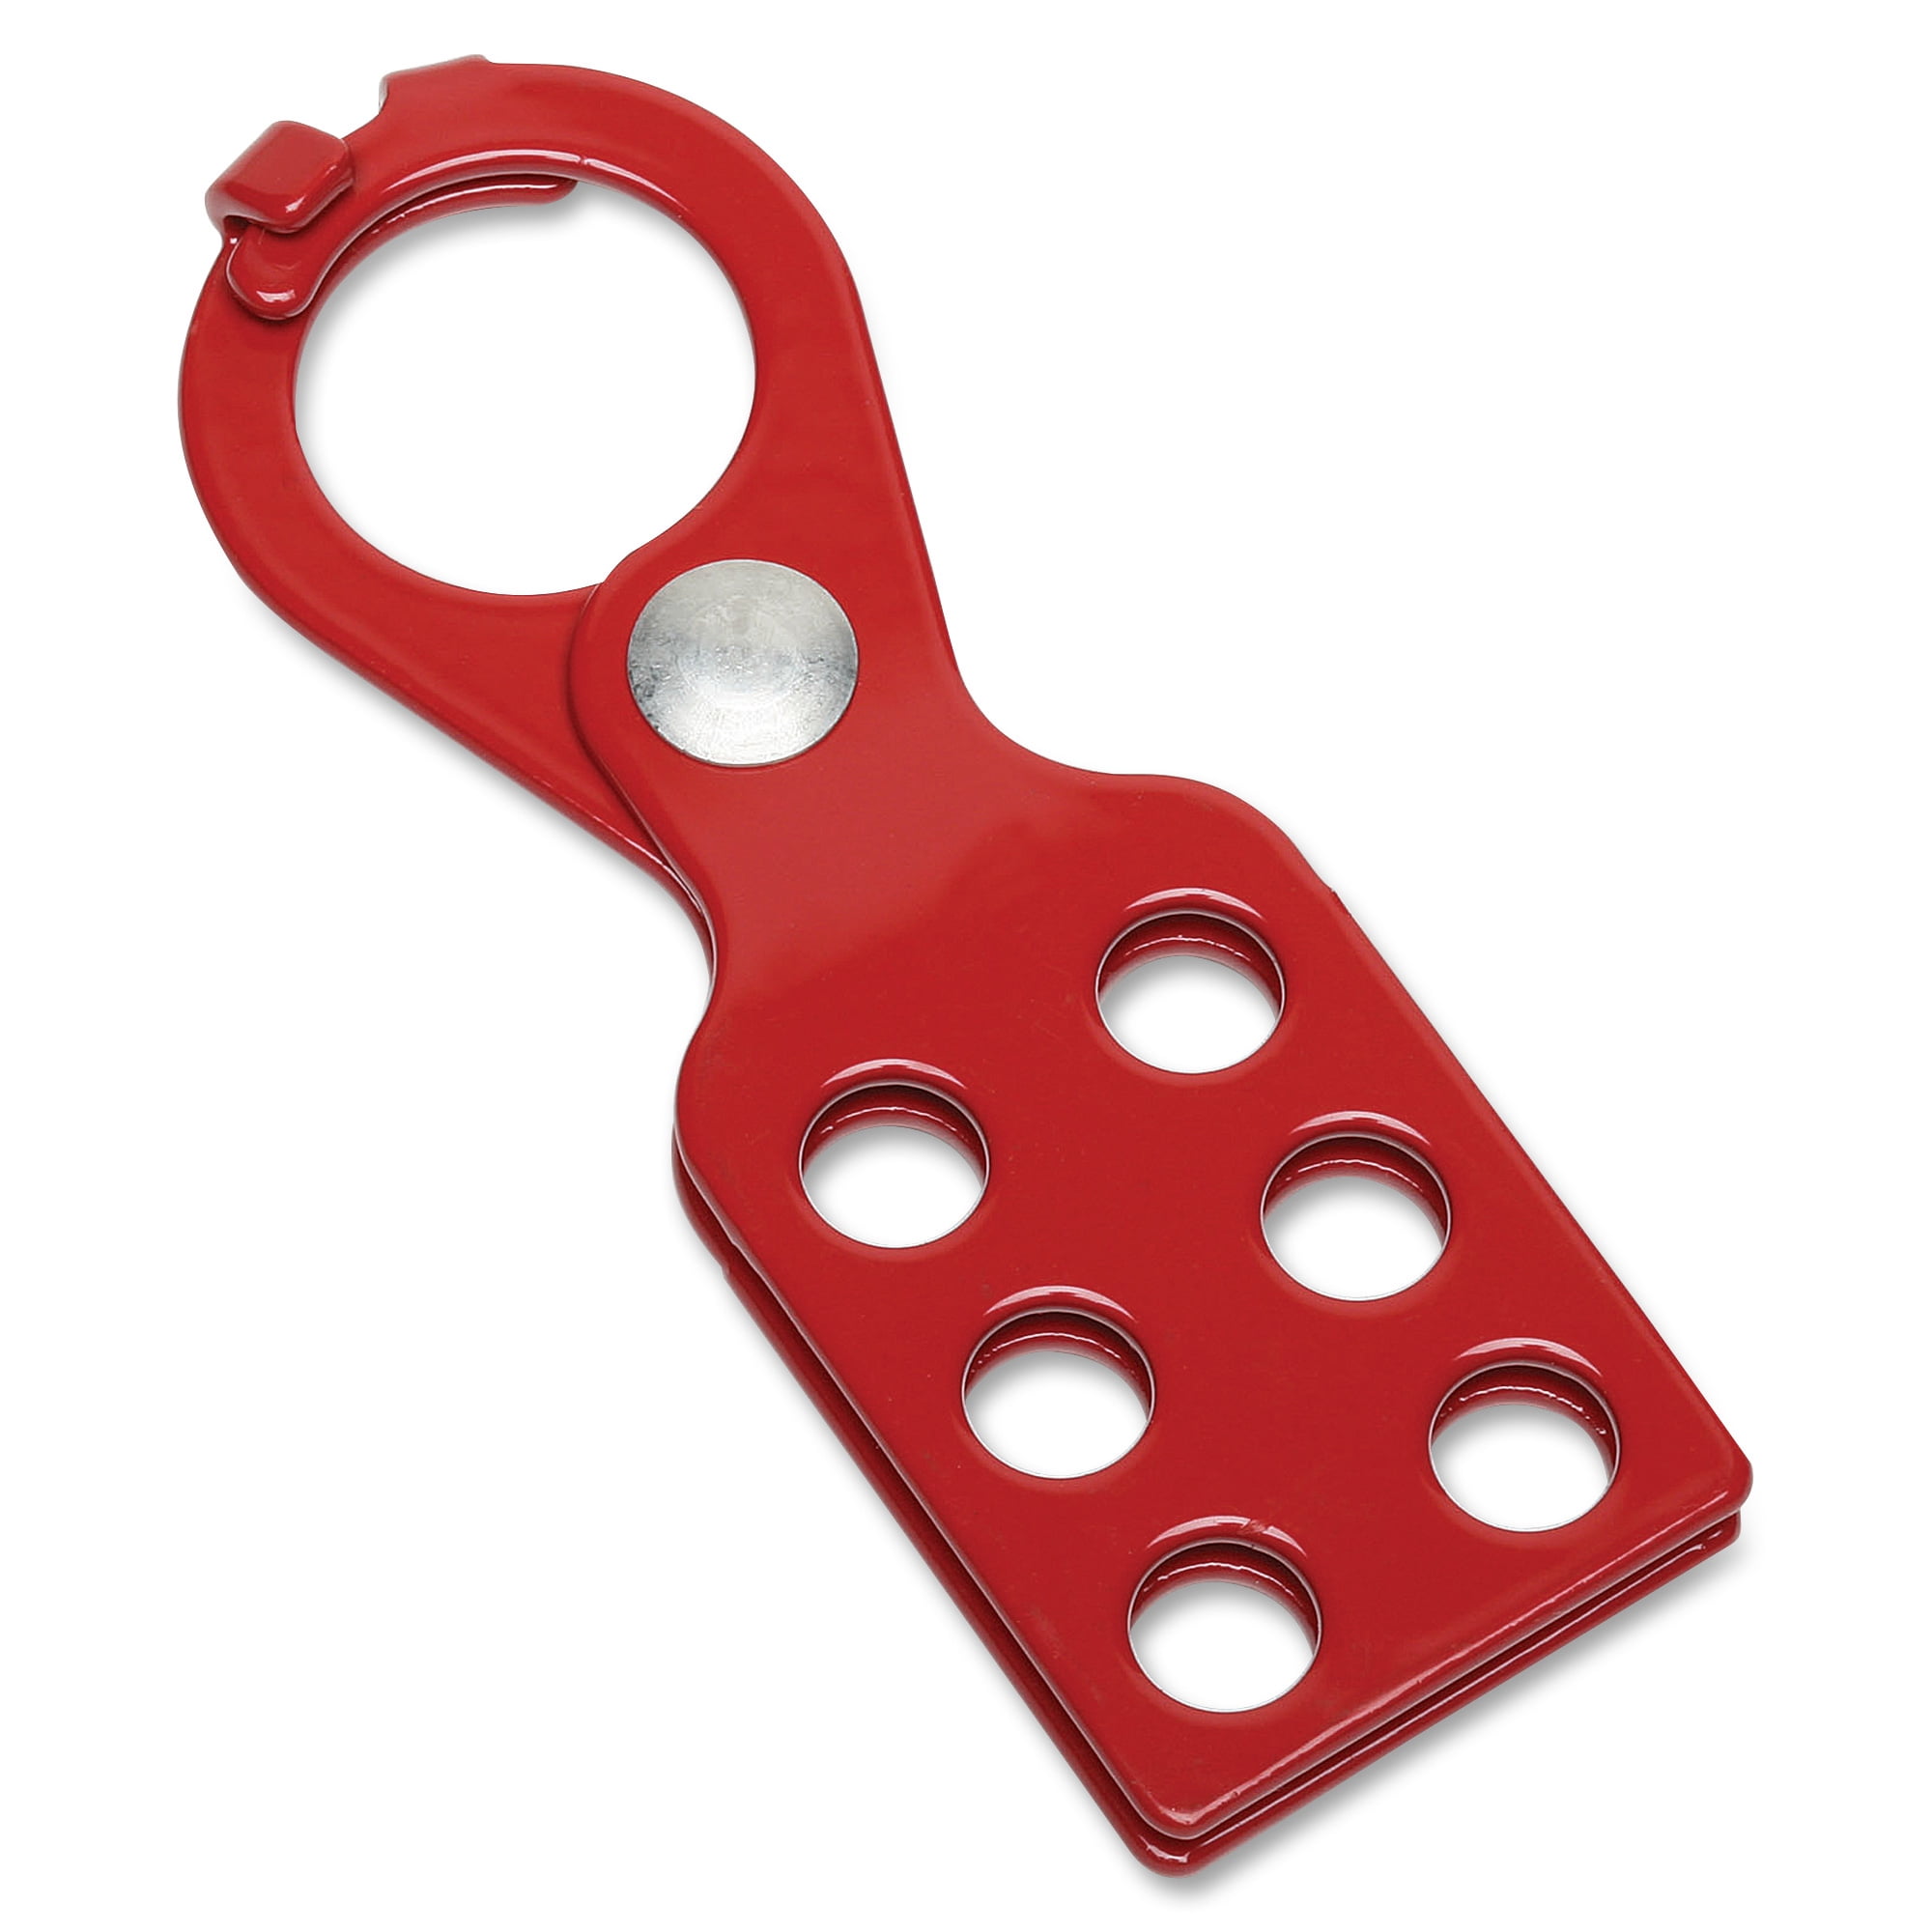 Lockout Tagout Powder Coated Hasp with 12 Holes Red Set of 5 pcs 